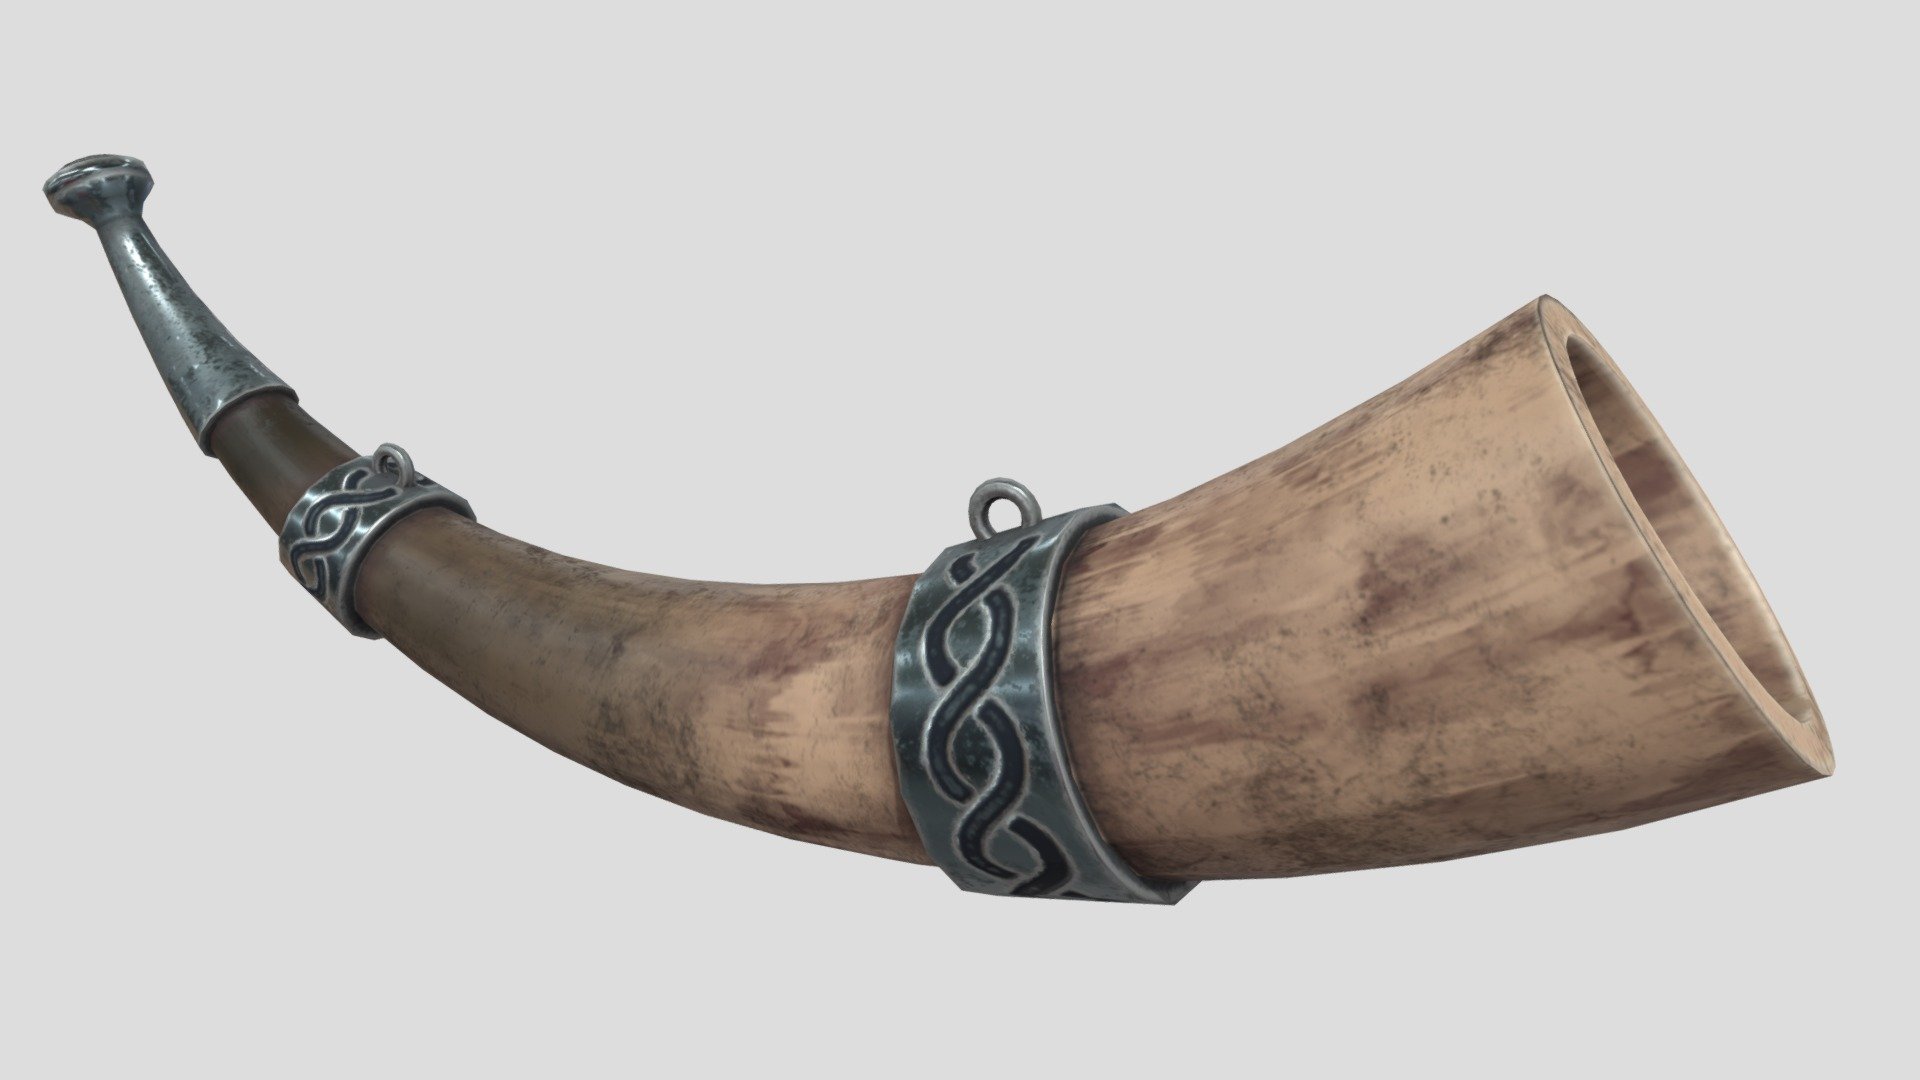 I made this horn by tutorial when I was learning Substance Painter. You can get this asset for free. 
If you like it you can like or comment - it would be nice of you.
Also you can follow me to get more free stuff in future.
Thank you a lot 3d model